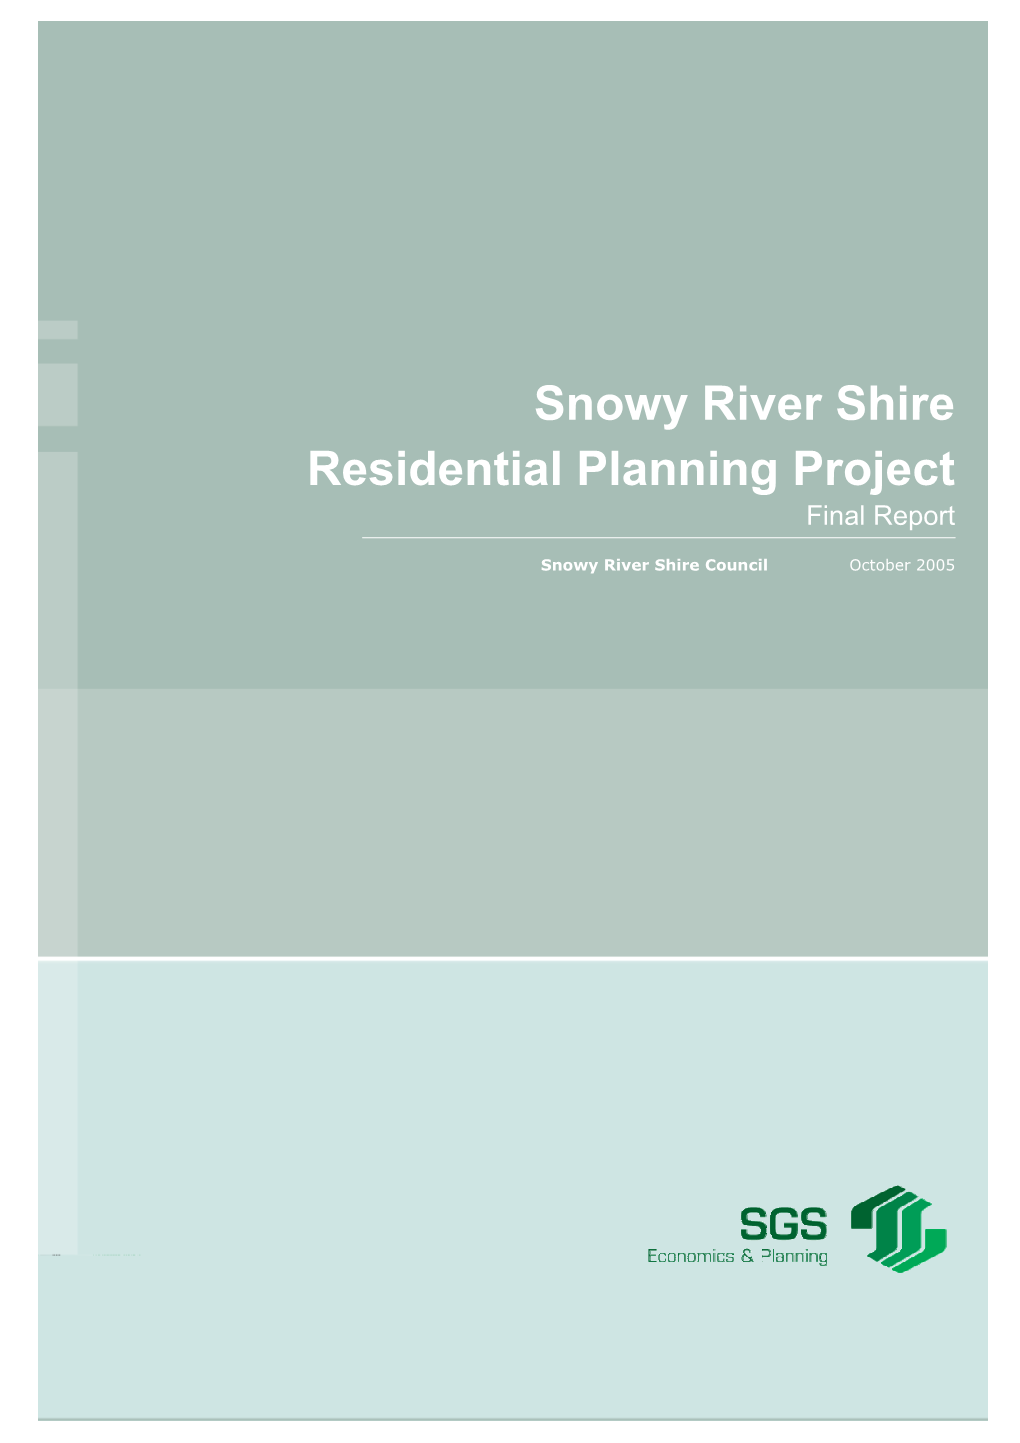 Snowy River Shire Residential Planning Project Final Report